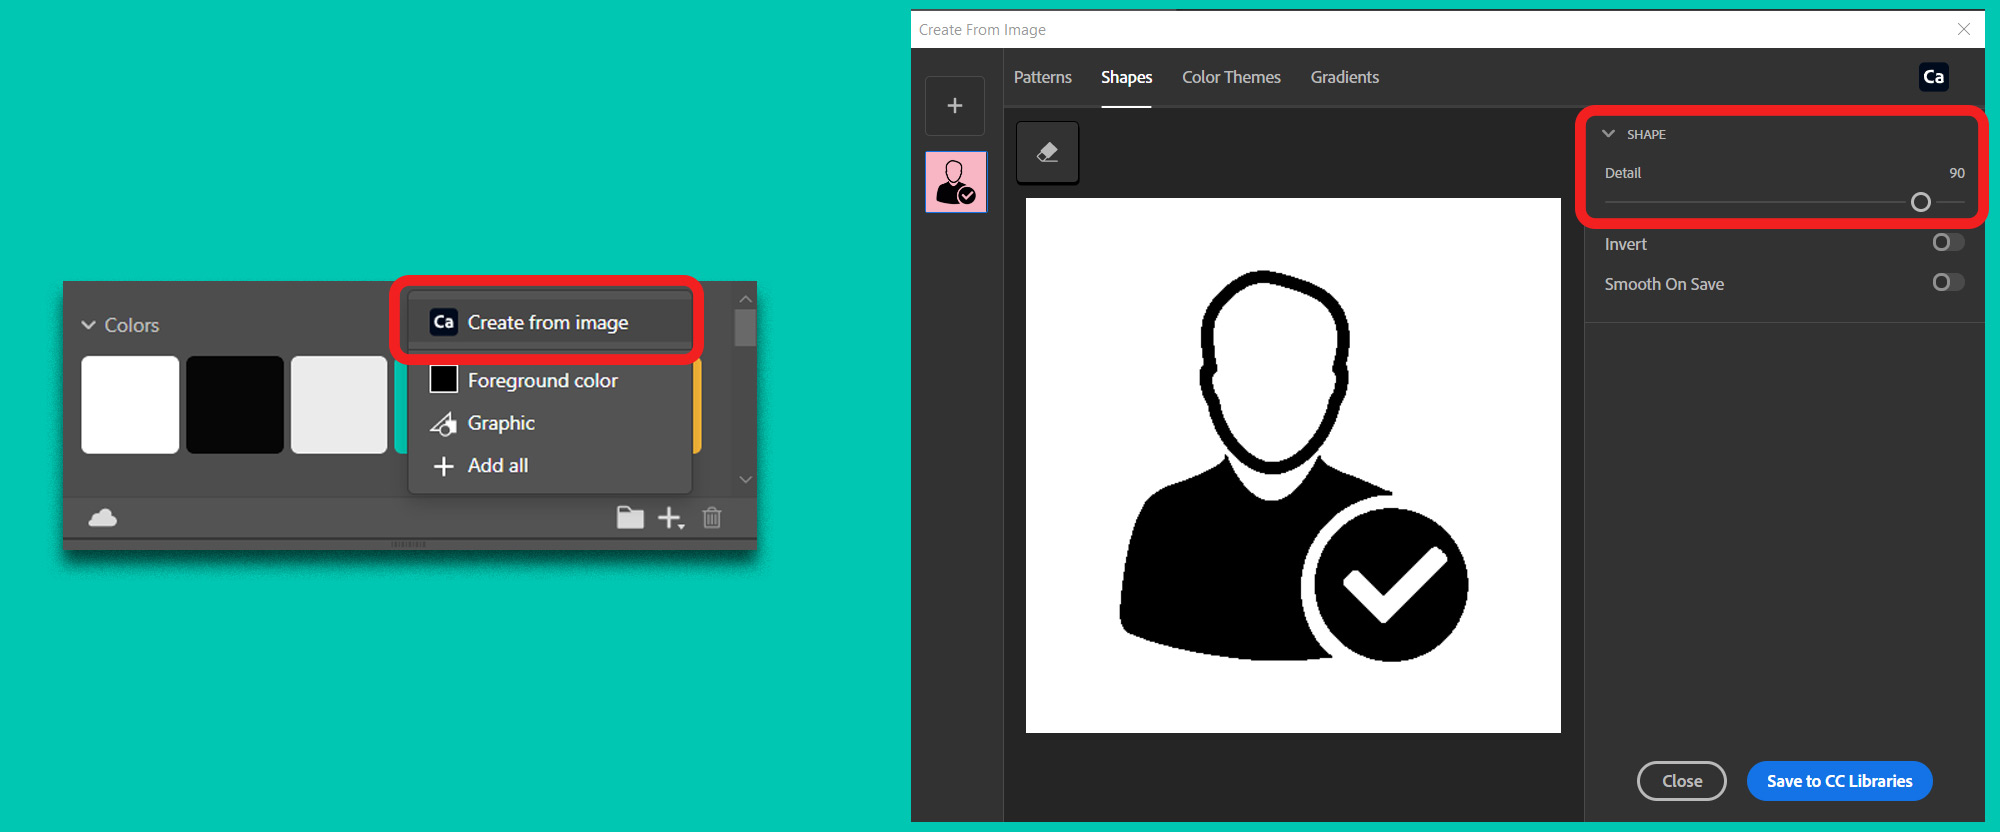 How to create vector graphics in Photoshop